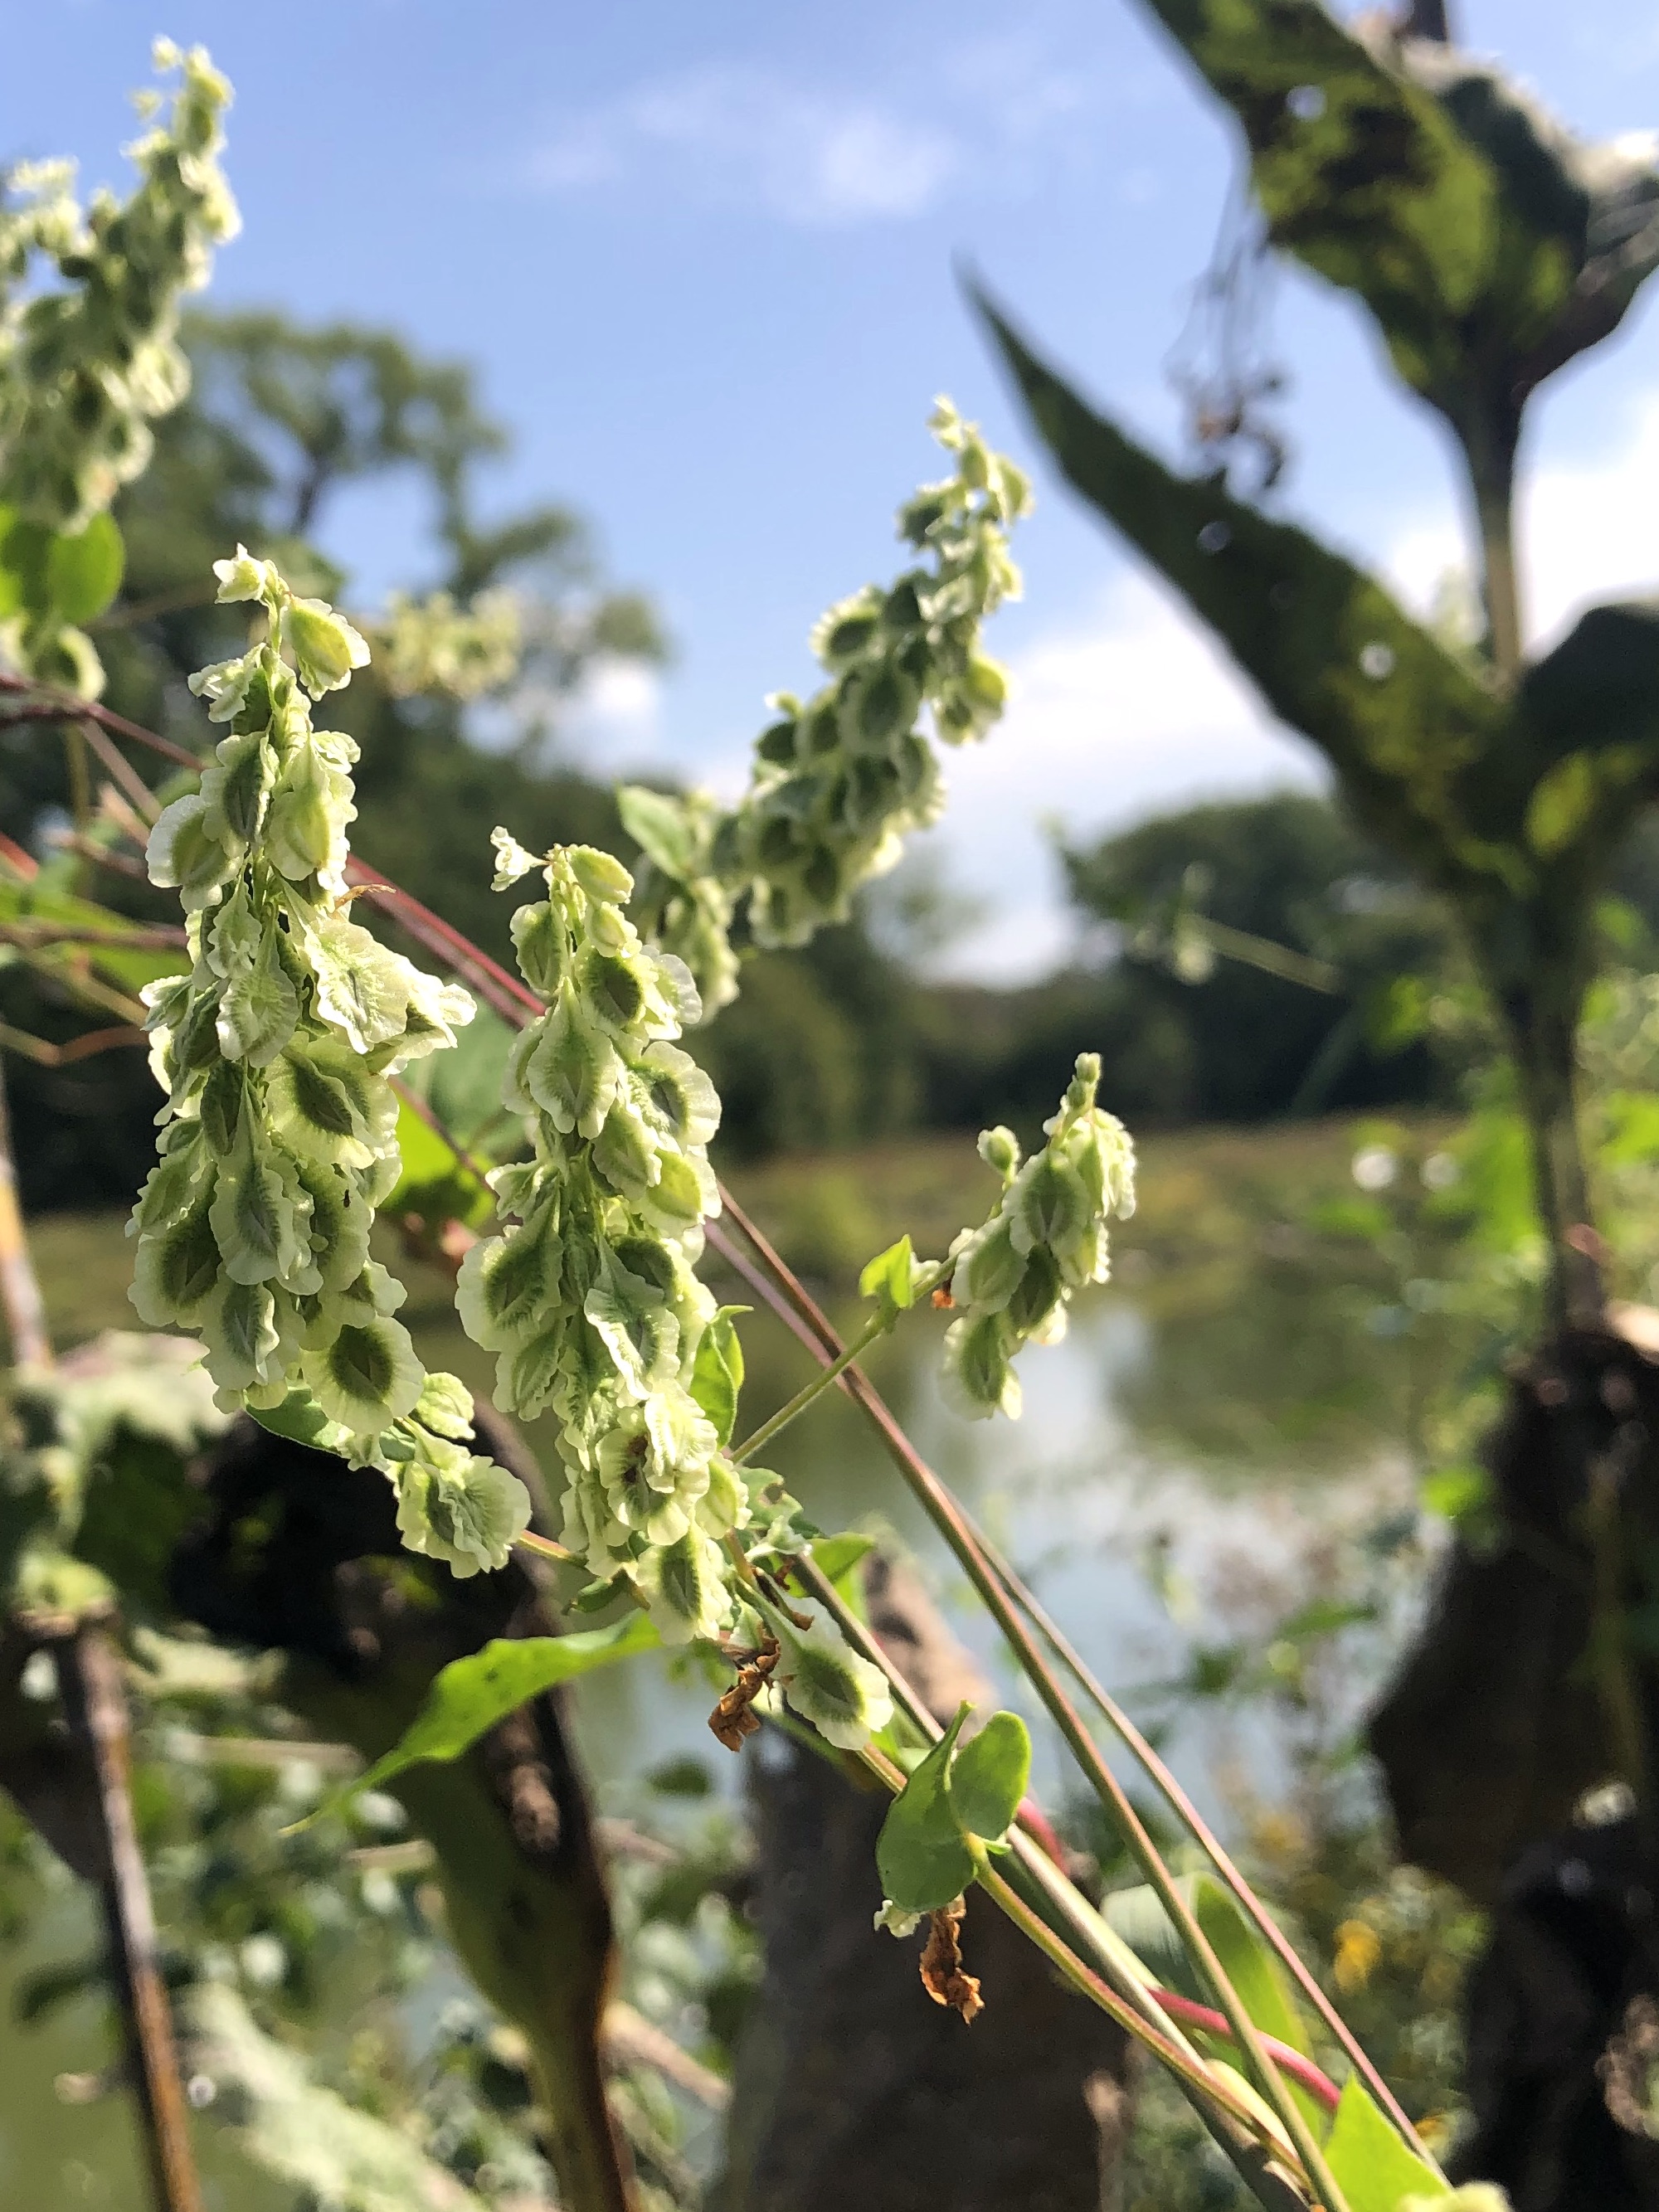 False Climbing Buckwheat on shore of Retaining Pond twining around dying Cup Plant in Madison, Wisconsin on September 16, 2022.